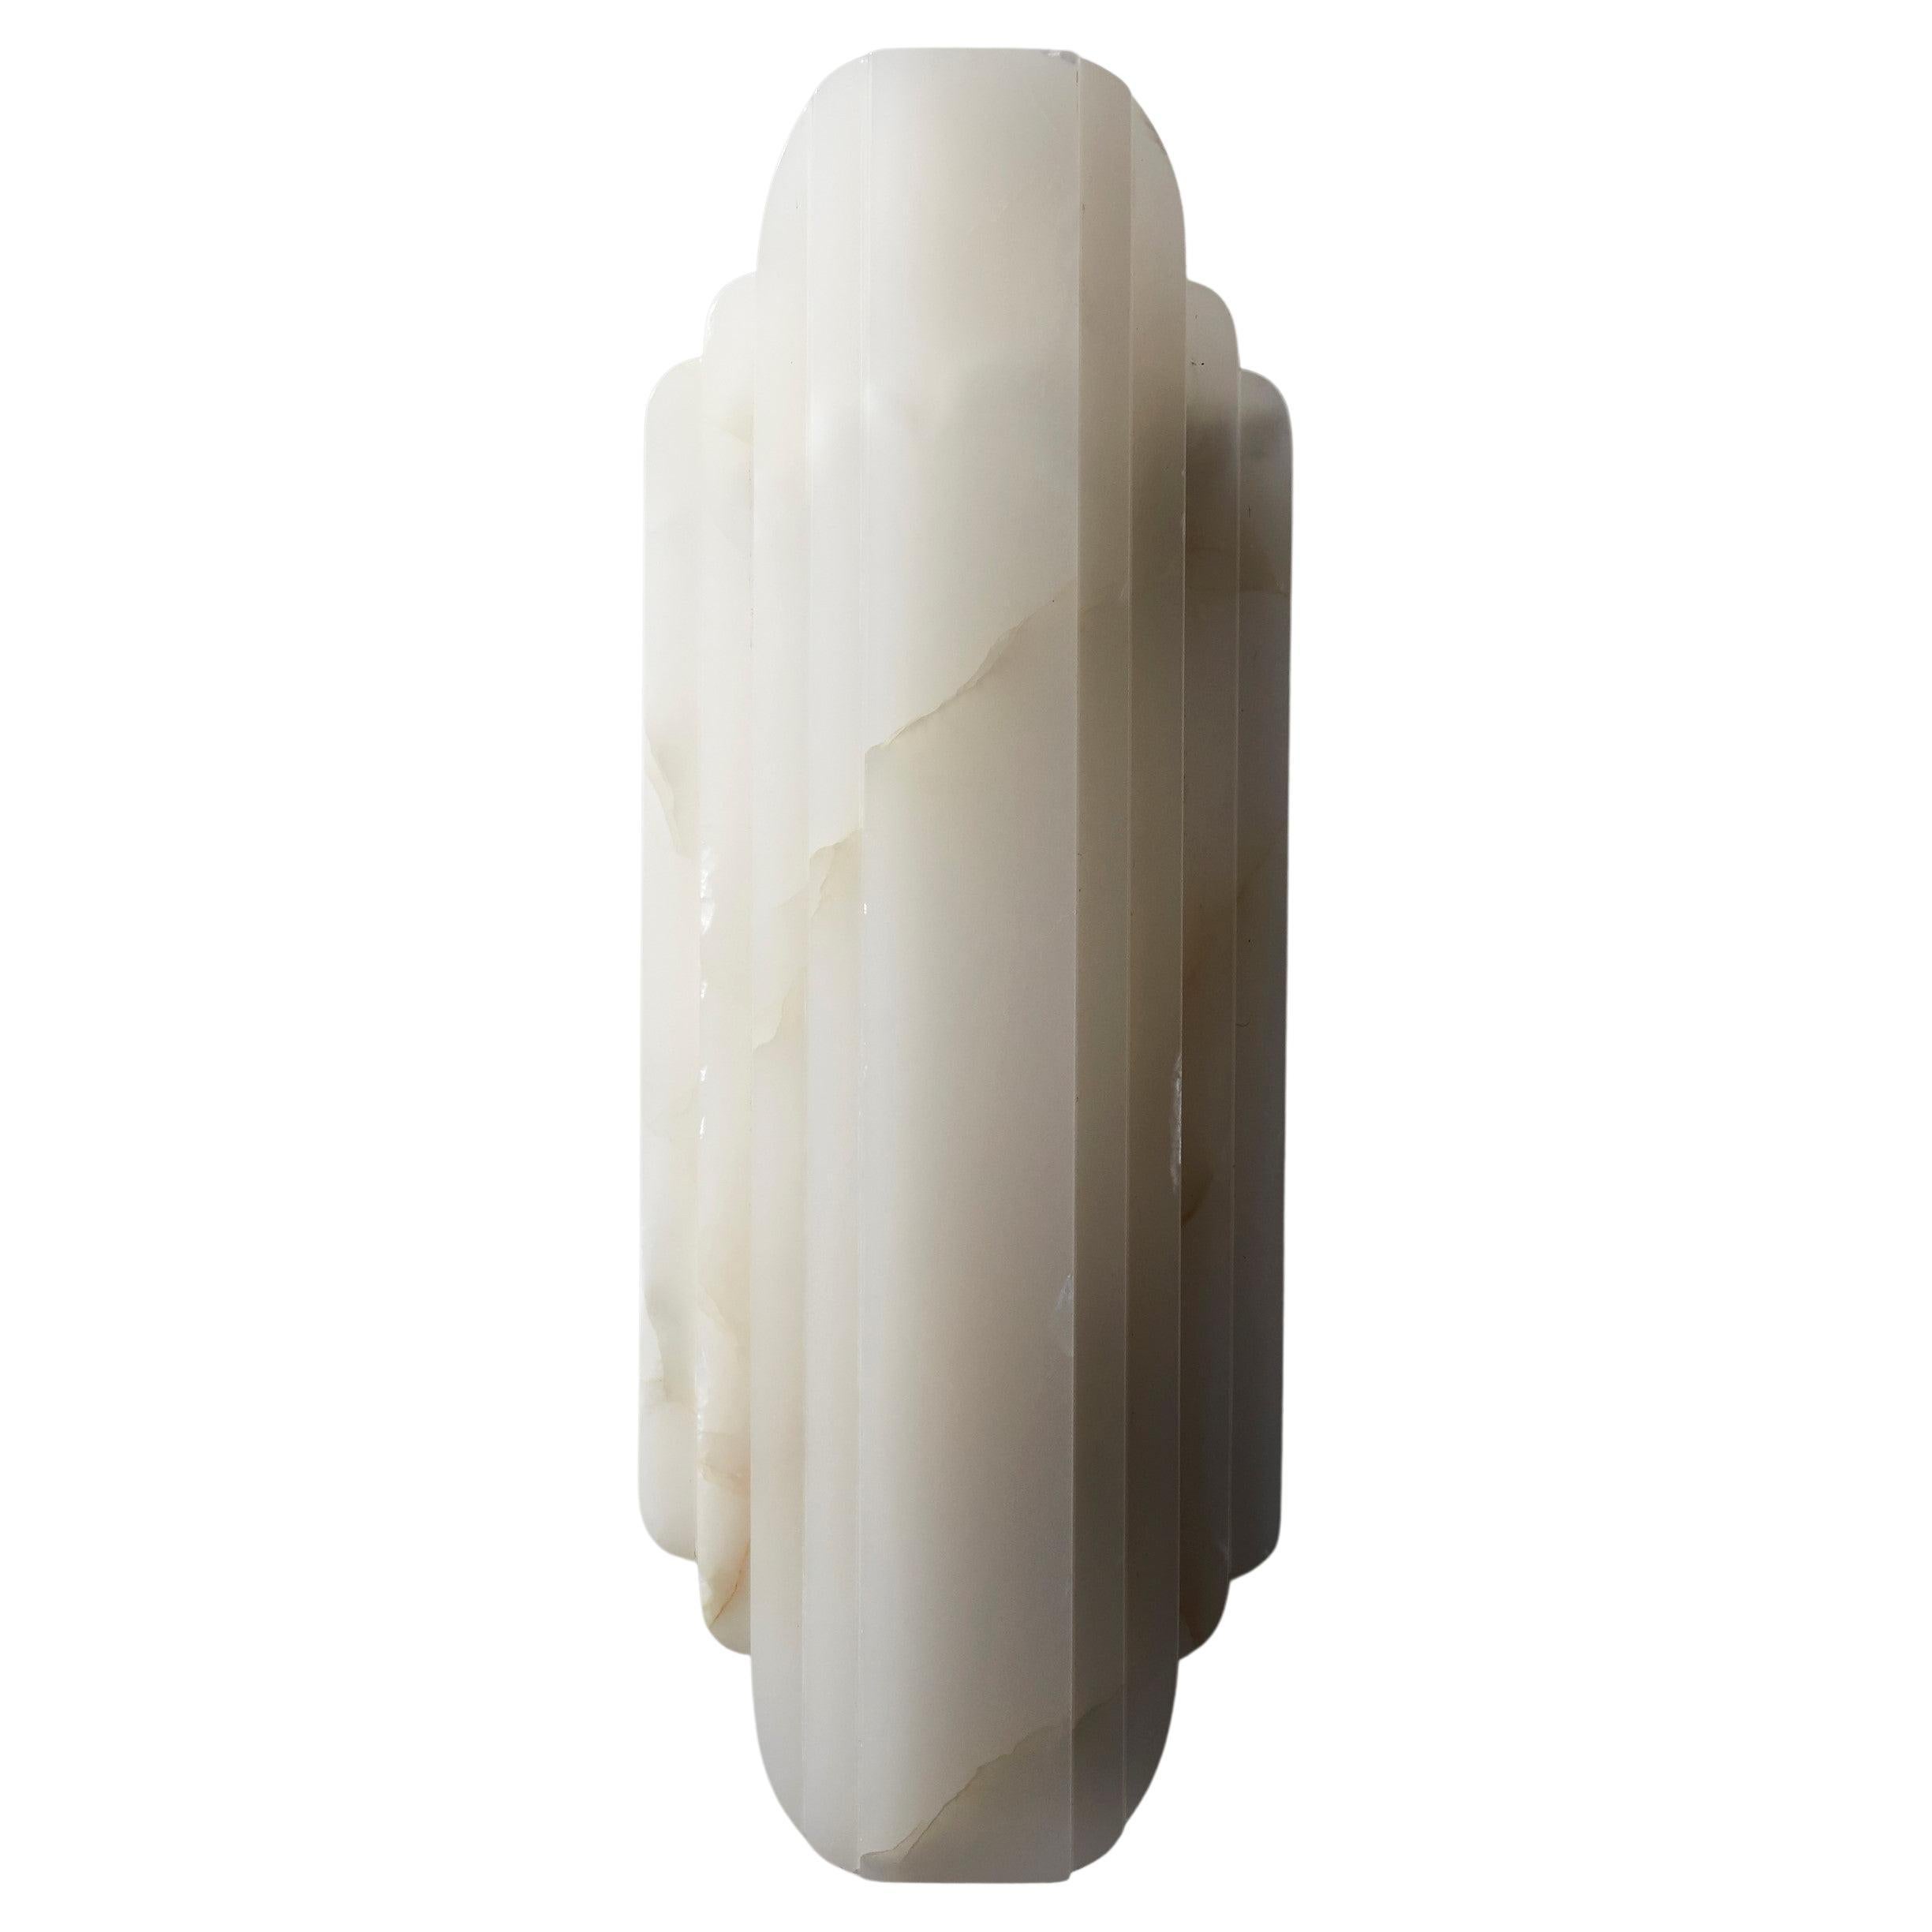 Walljewel white Onyx by Lisette Rützou
Dimensions: 15 x H 42 cm
Materials: Rose, green and white Onyx

 Lisette Rützou’s design is motivated by an urge to articulate a story. Inspired by the beauty of materials, form and architecture, each